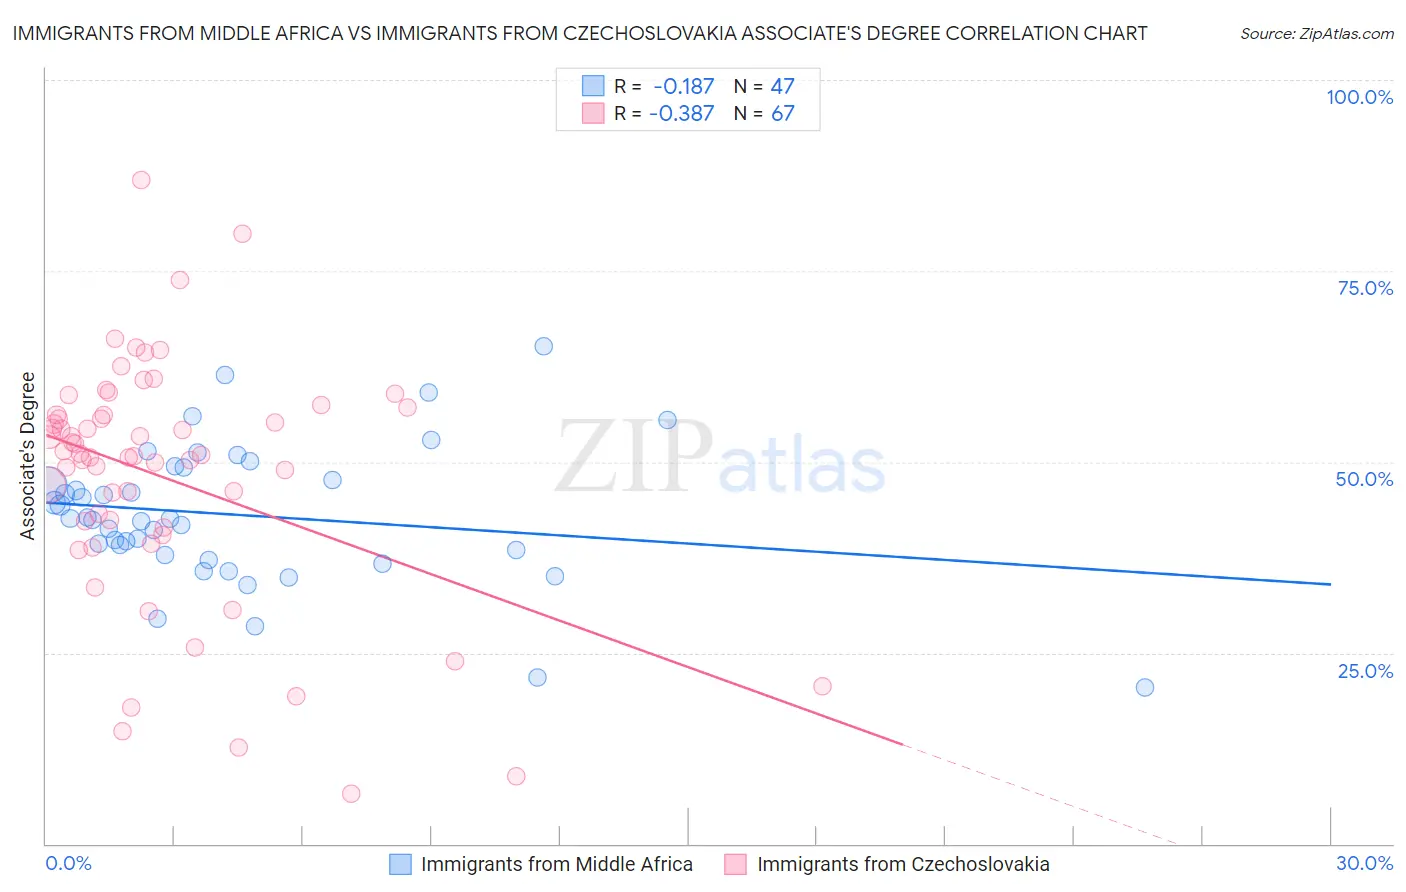 Immigrants from Middle Africa vs Immigrants from Czechoslovakia Associate's Degree